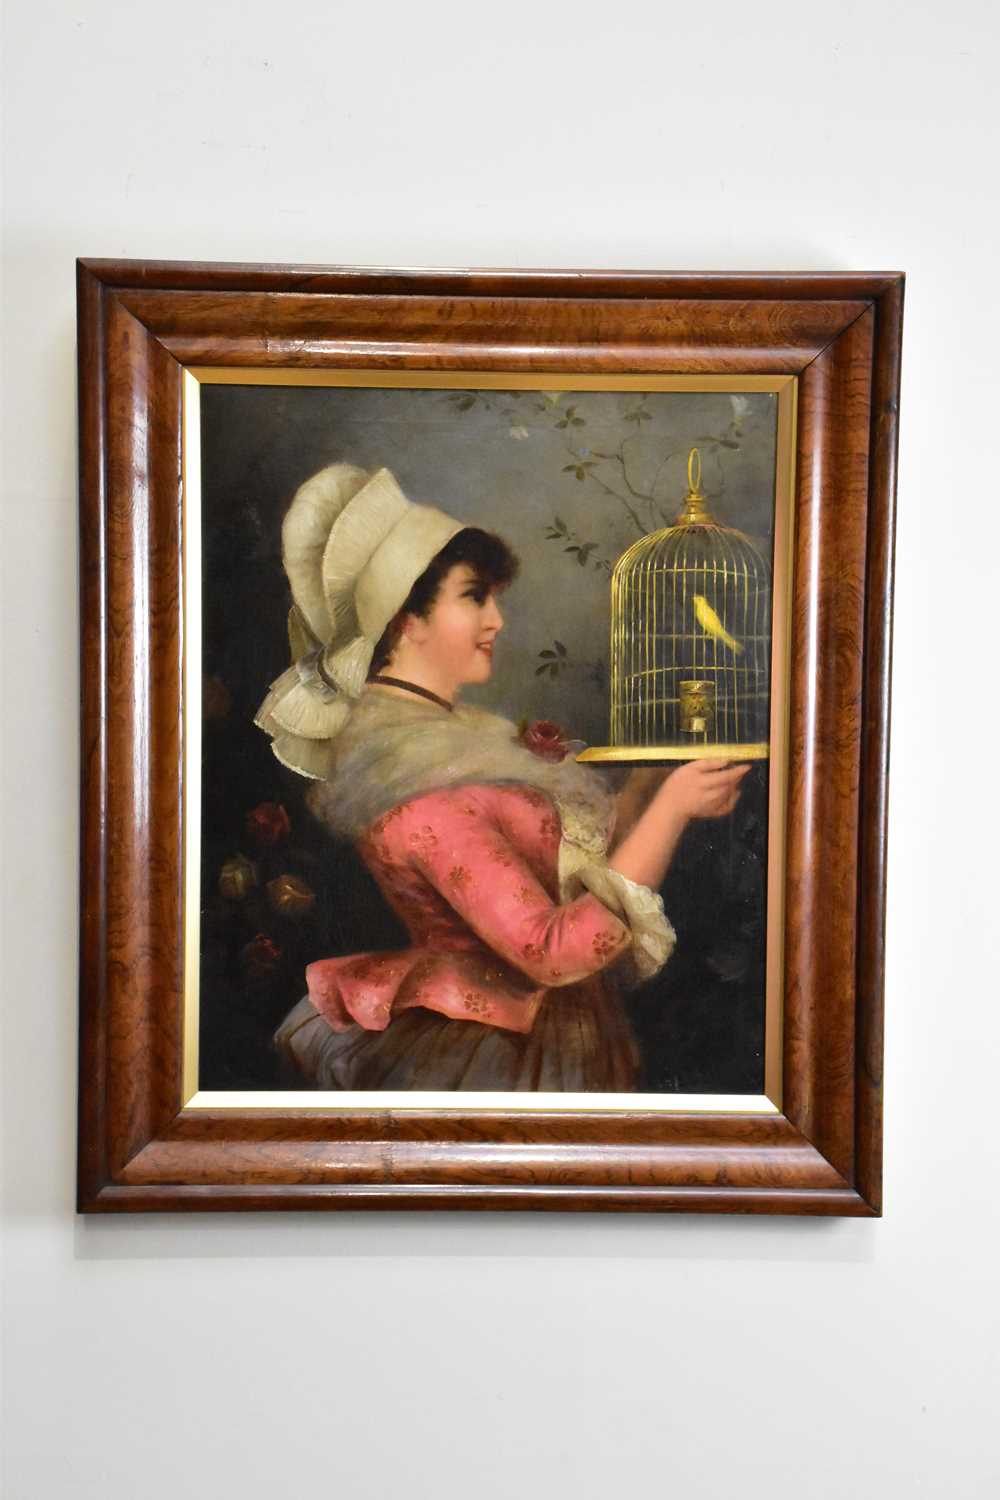 F RUST, 19th CENTURY; oil on canvas, portrait of a maiden in a floral pink top holding a cage with a